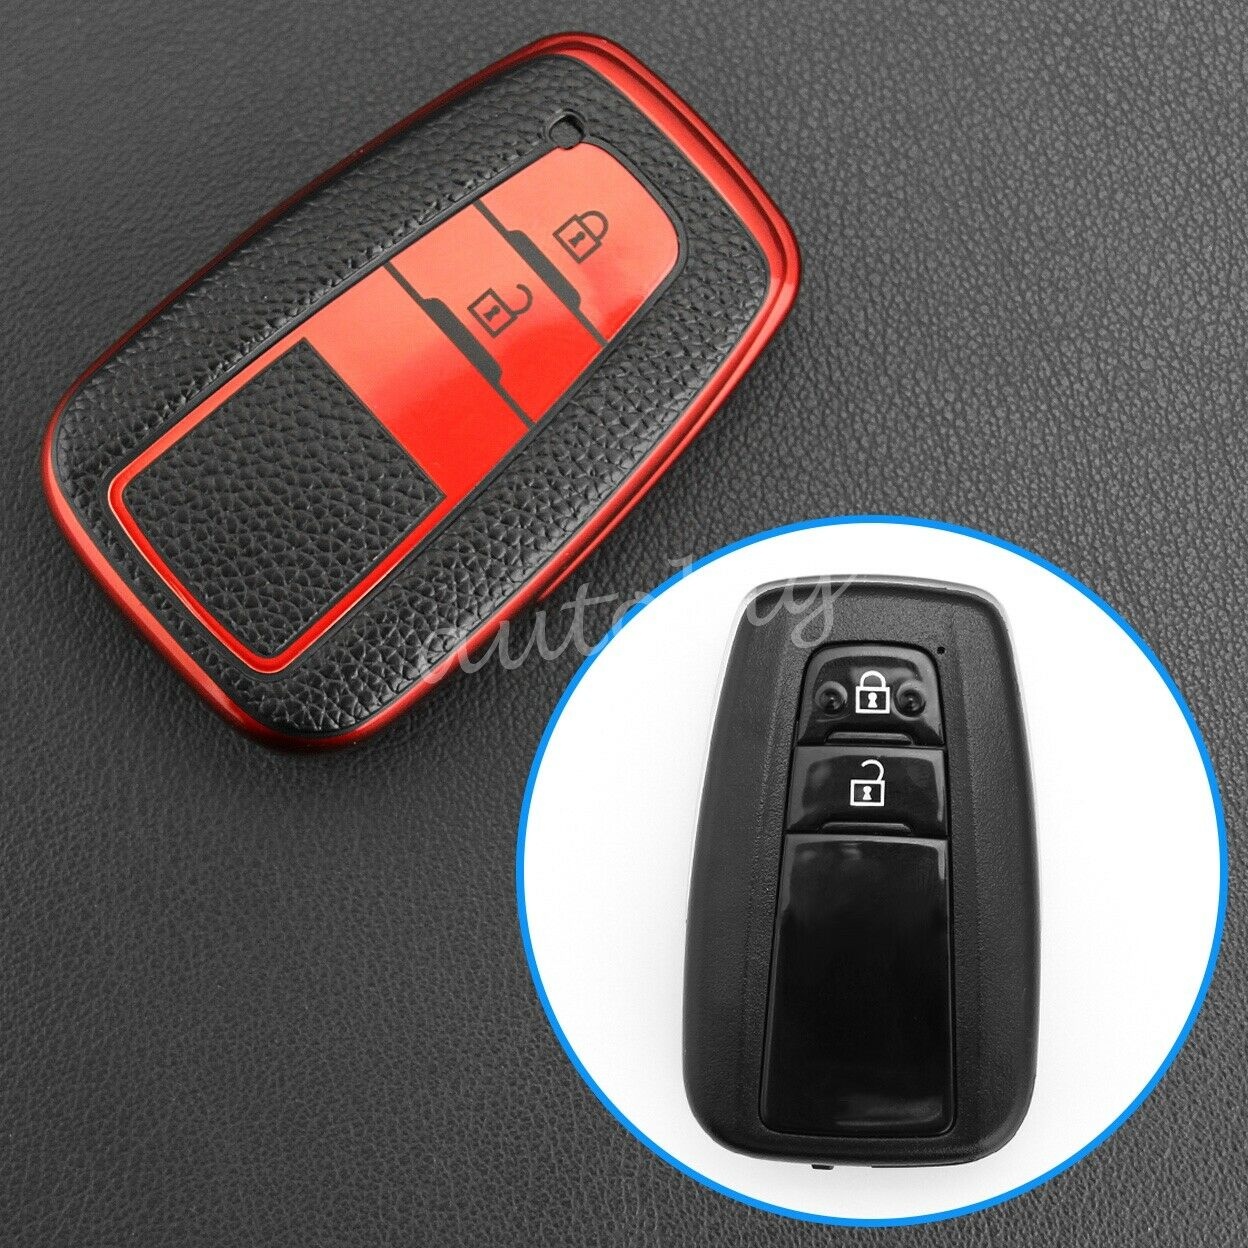 Smart Car Key Fob Cover Case For Toyota Camry CHR RAV4 Corolla Prius Leather Red